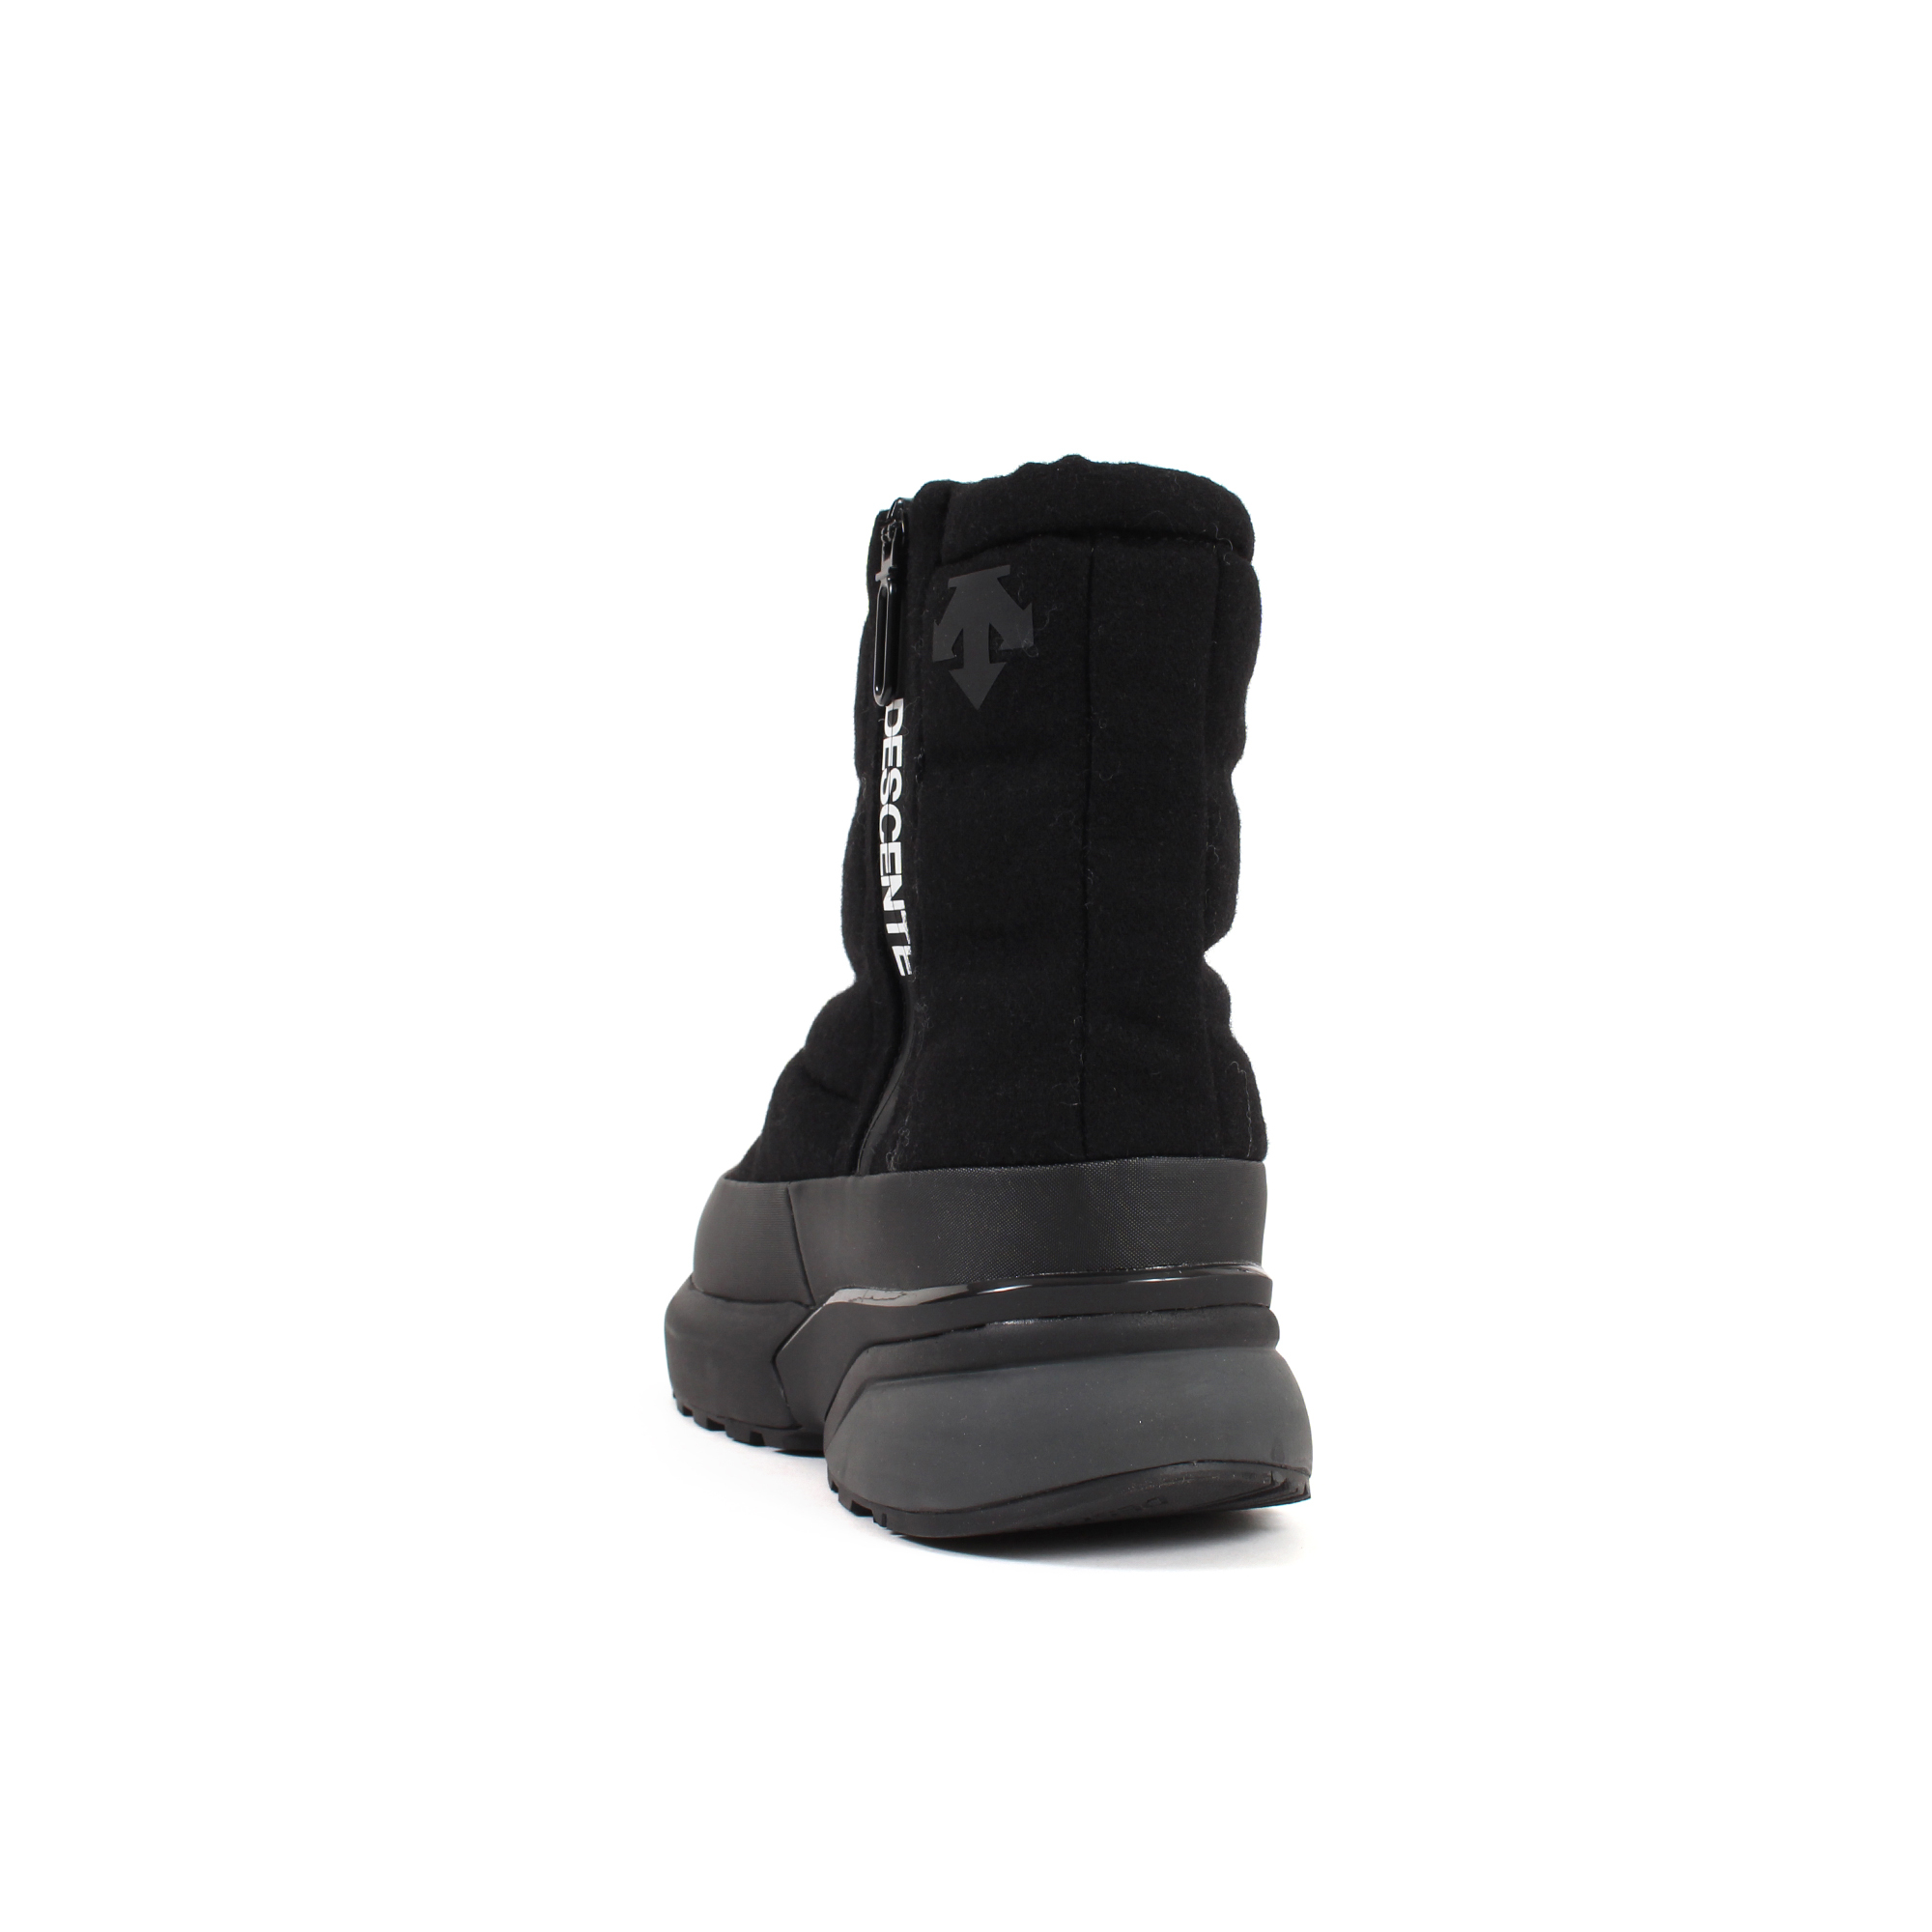 DESCENTE デサント ACTIVE WINTER BOOTS アクティブウィンターブーツ 